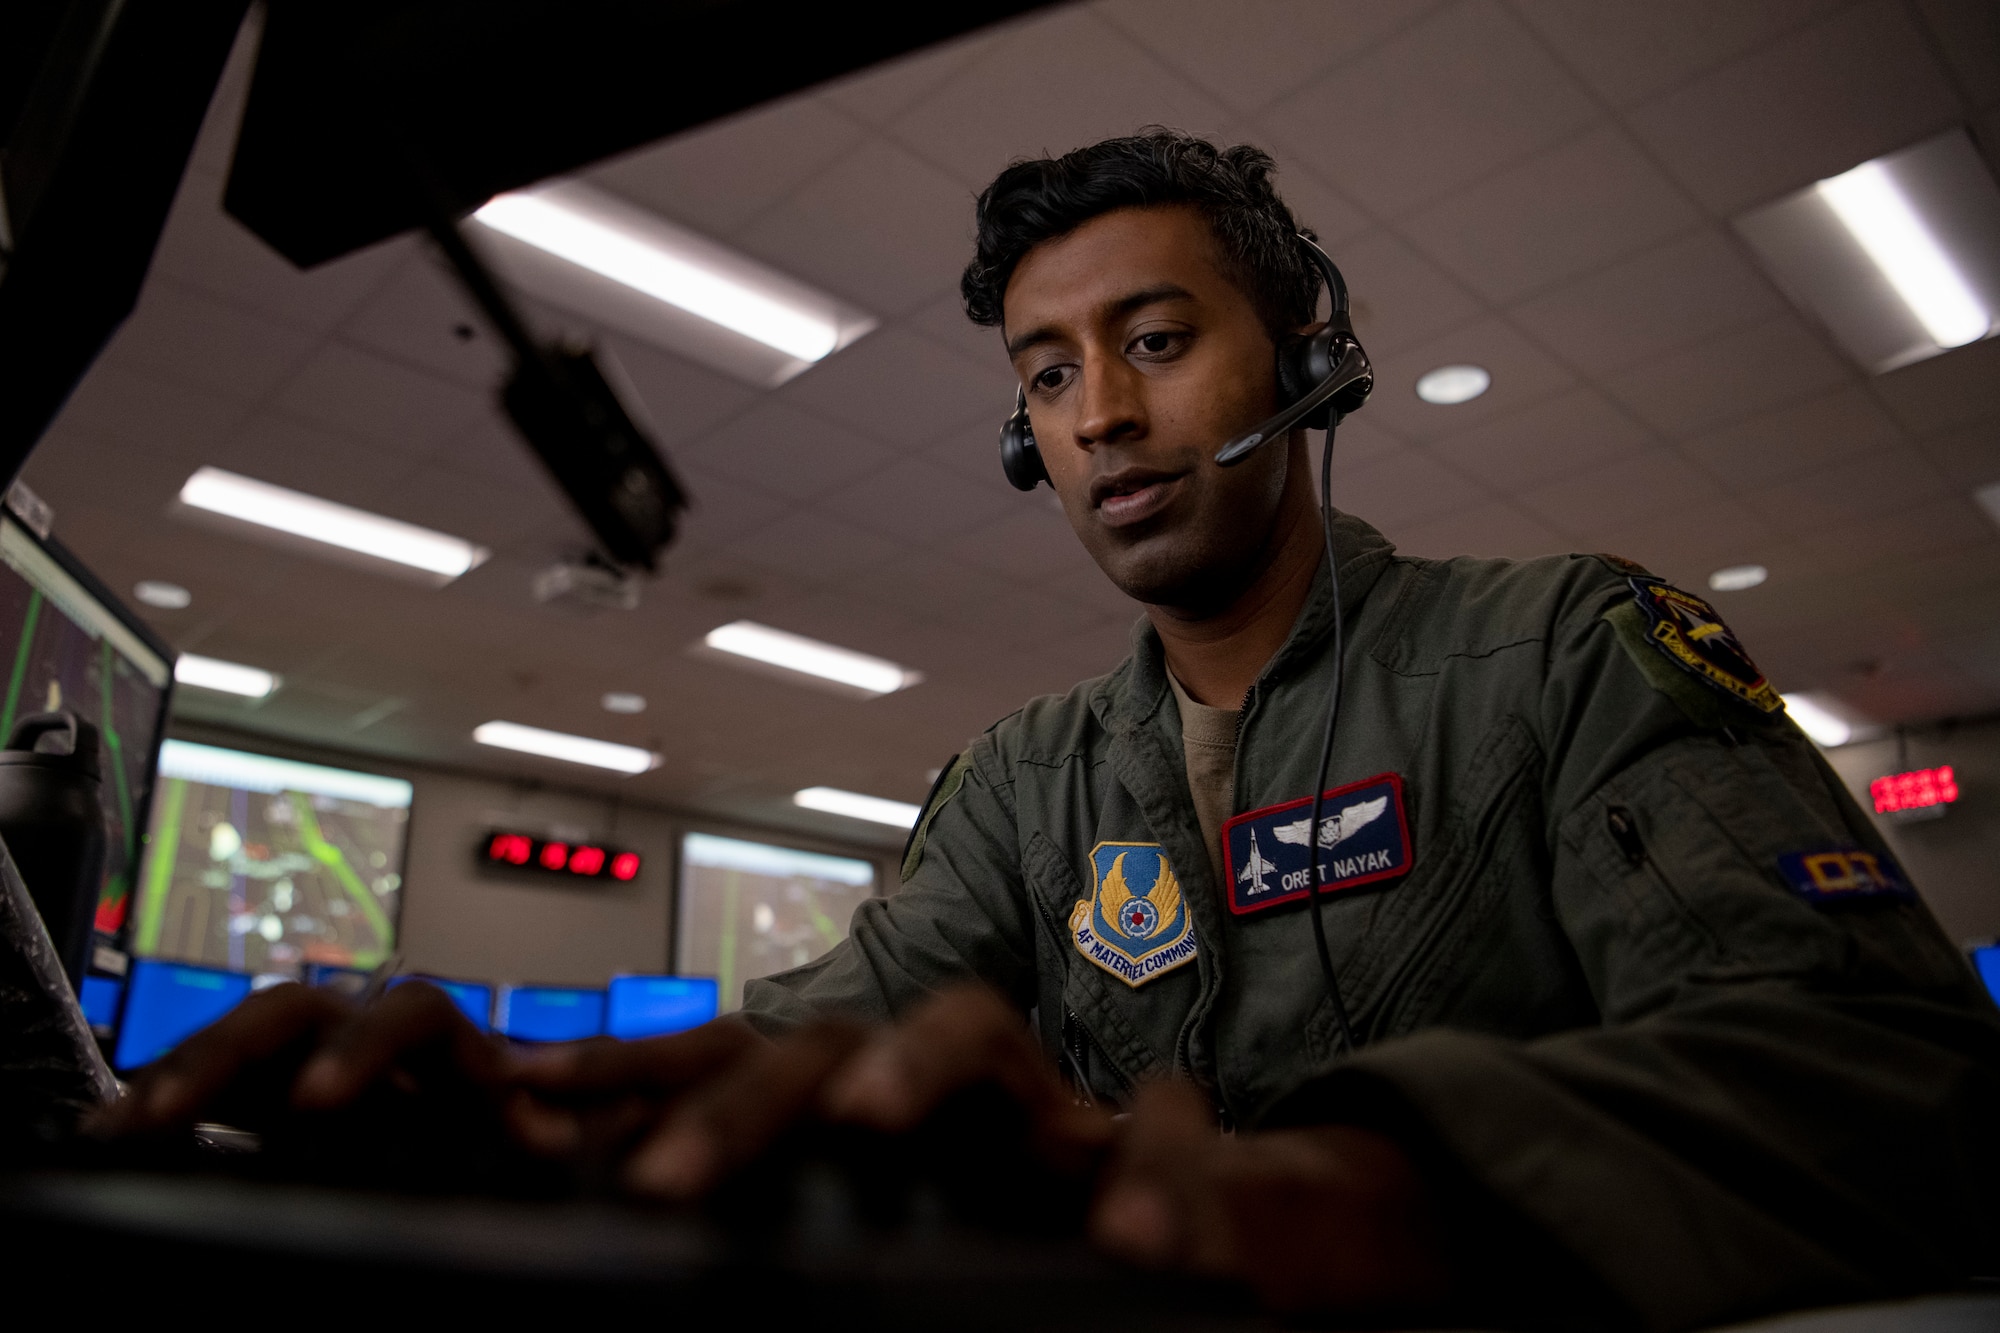 Airman works on computer with headset